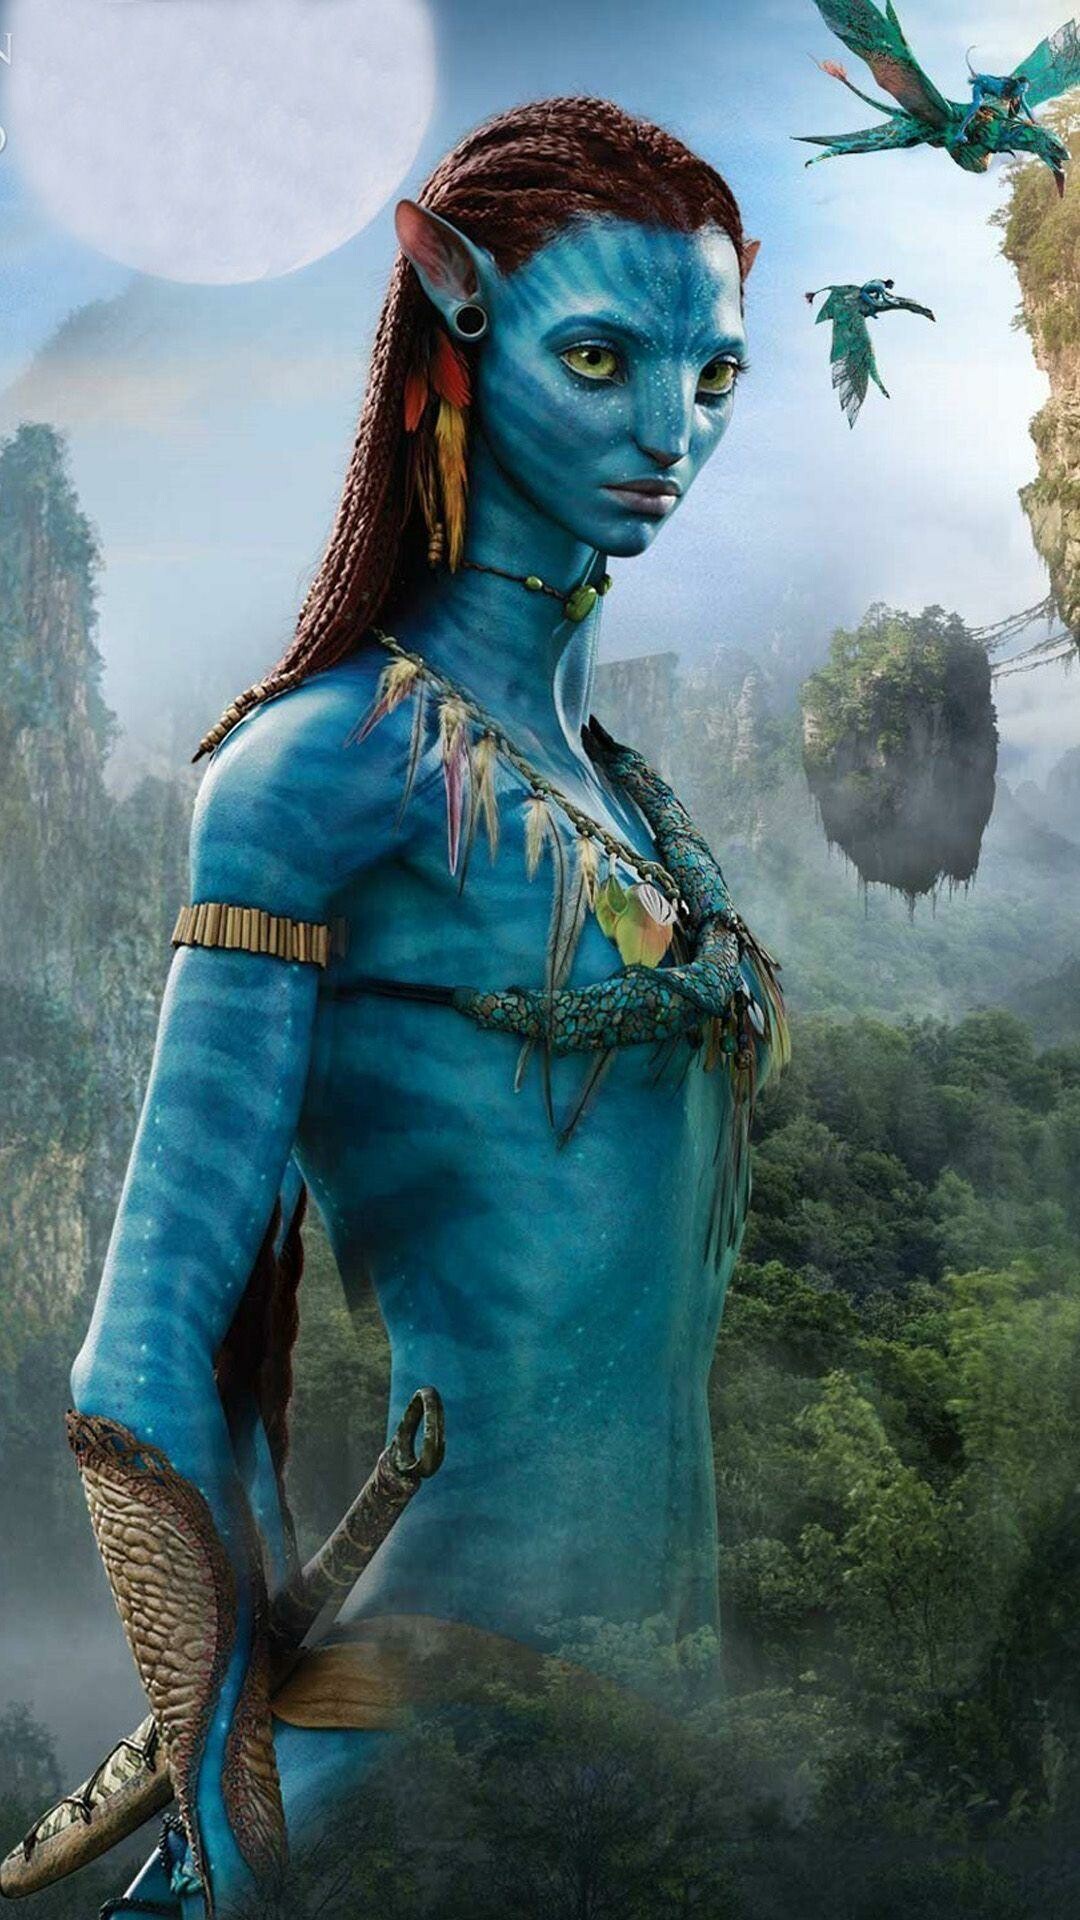 Avatar: Humans, who have depleted their planet's natural resources, are engaged in mining Pandora's reserves of a precious mineral vital to the economy known as unobtanium, Sci-fi. 1080x1920 Full HD Background.